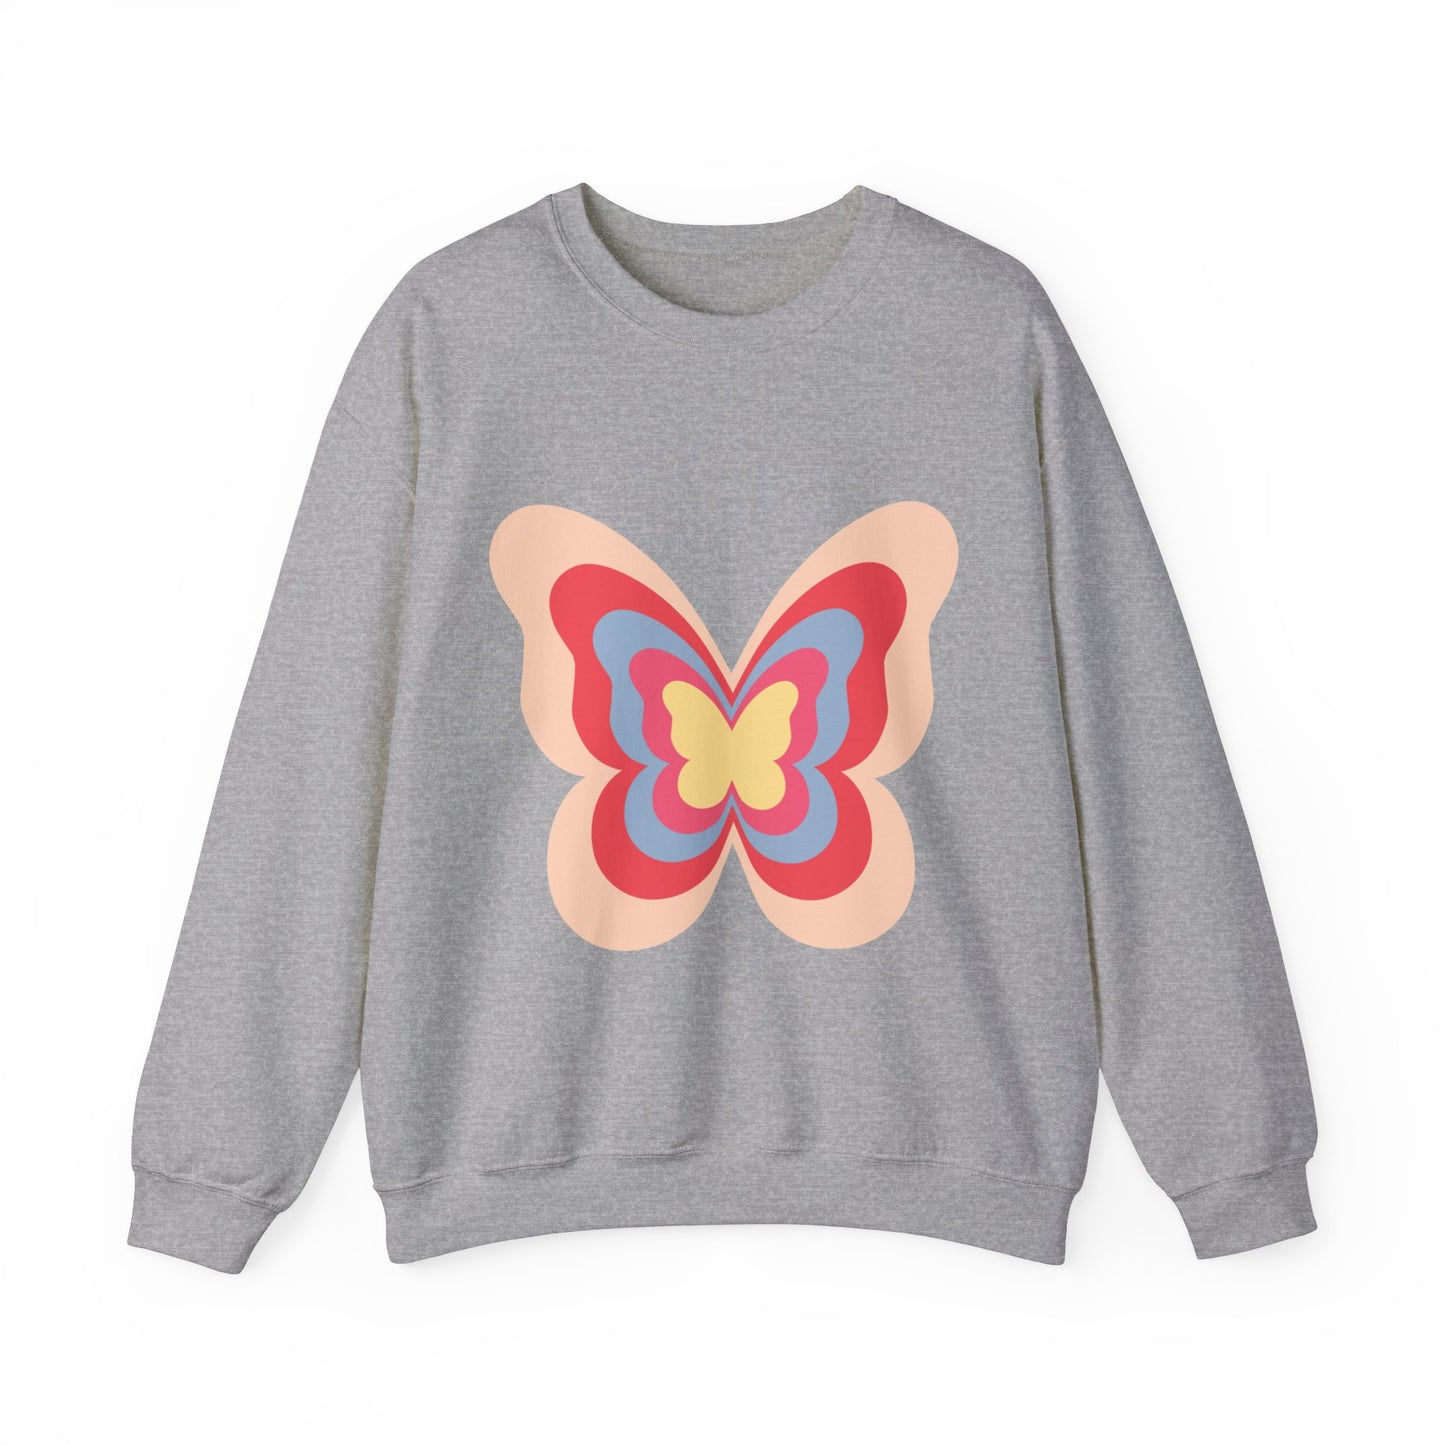 Personalized premium sweatshirt for mom, comfort and style, mother's day, gifts for mom's day, custom mama, butterfly design